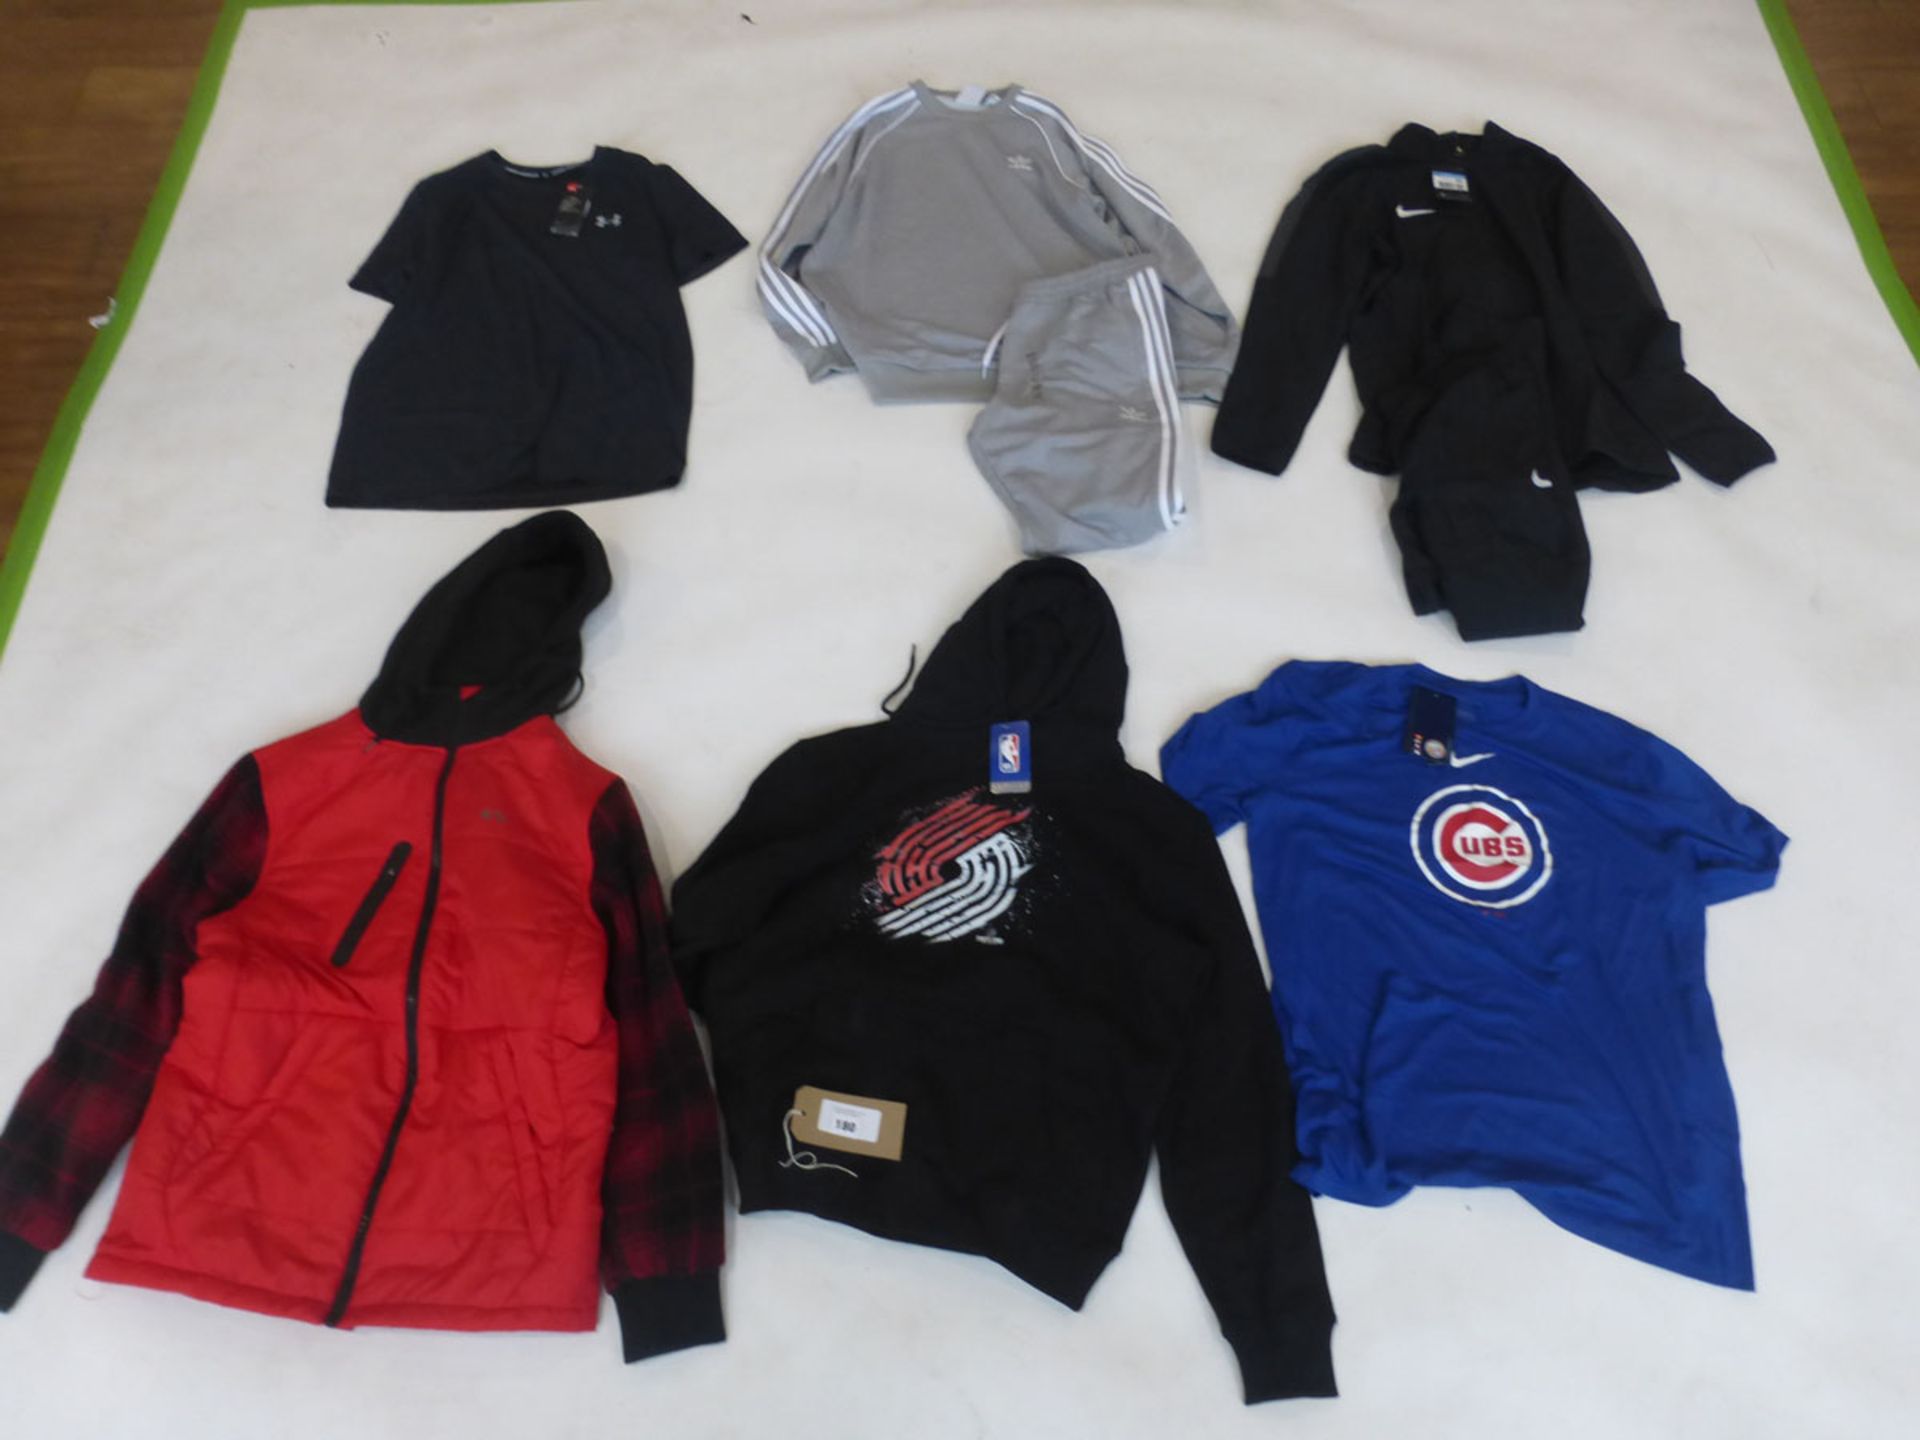 Selection of sportswear to include Nike, Adidas, Under Armour, etc